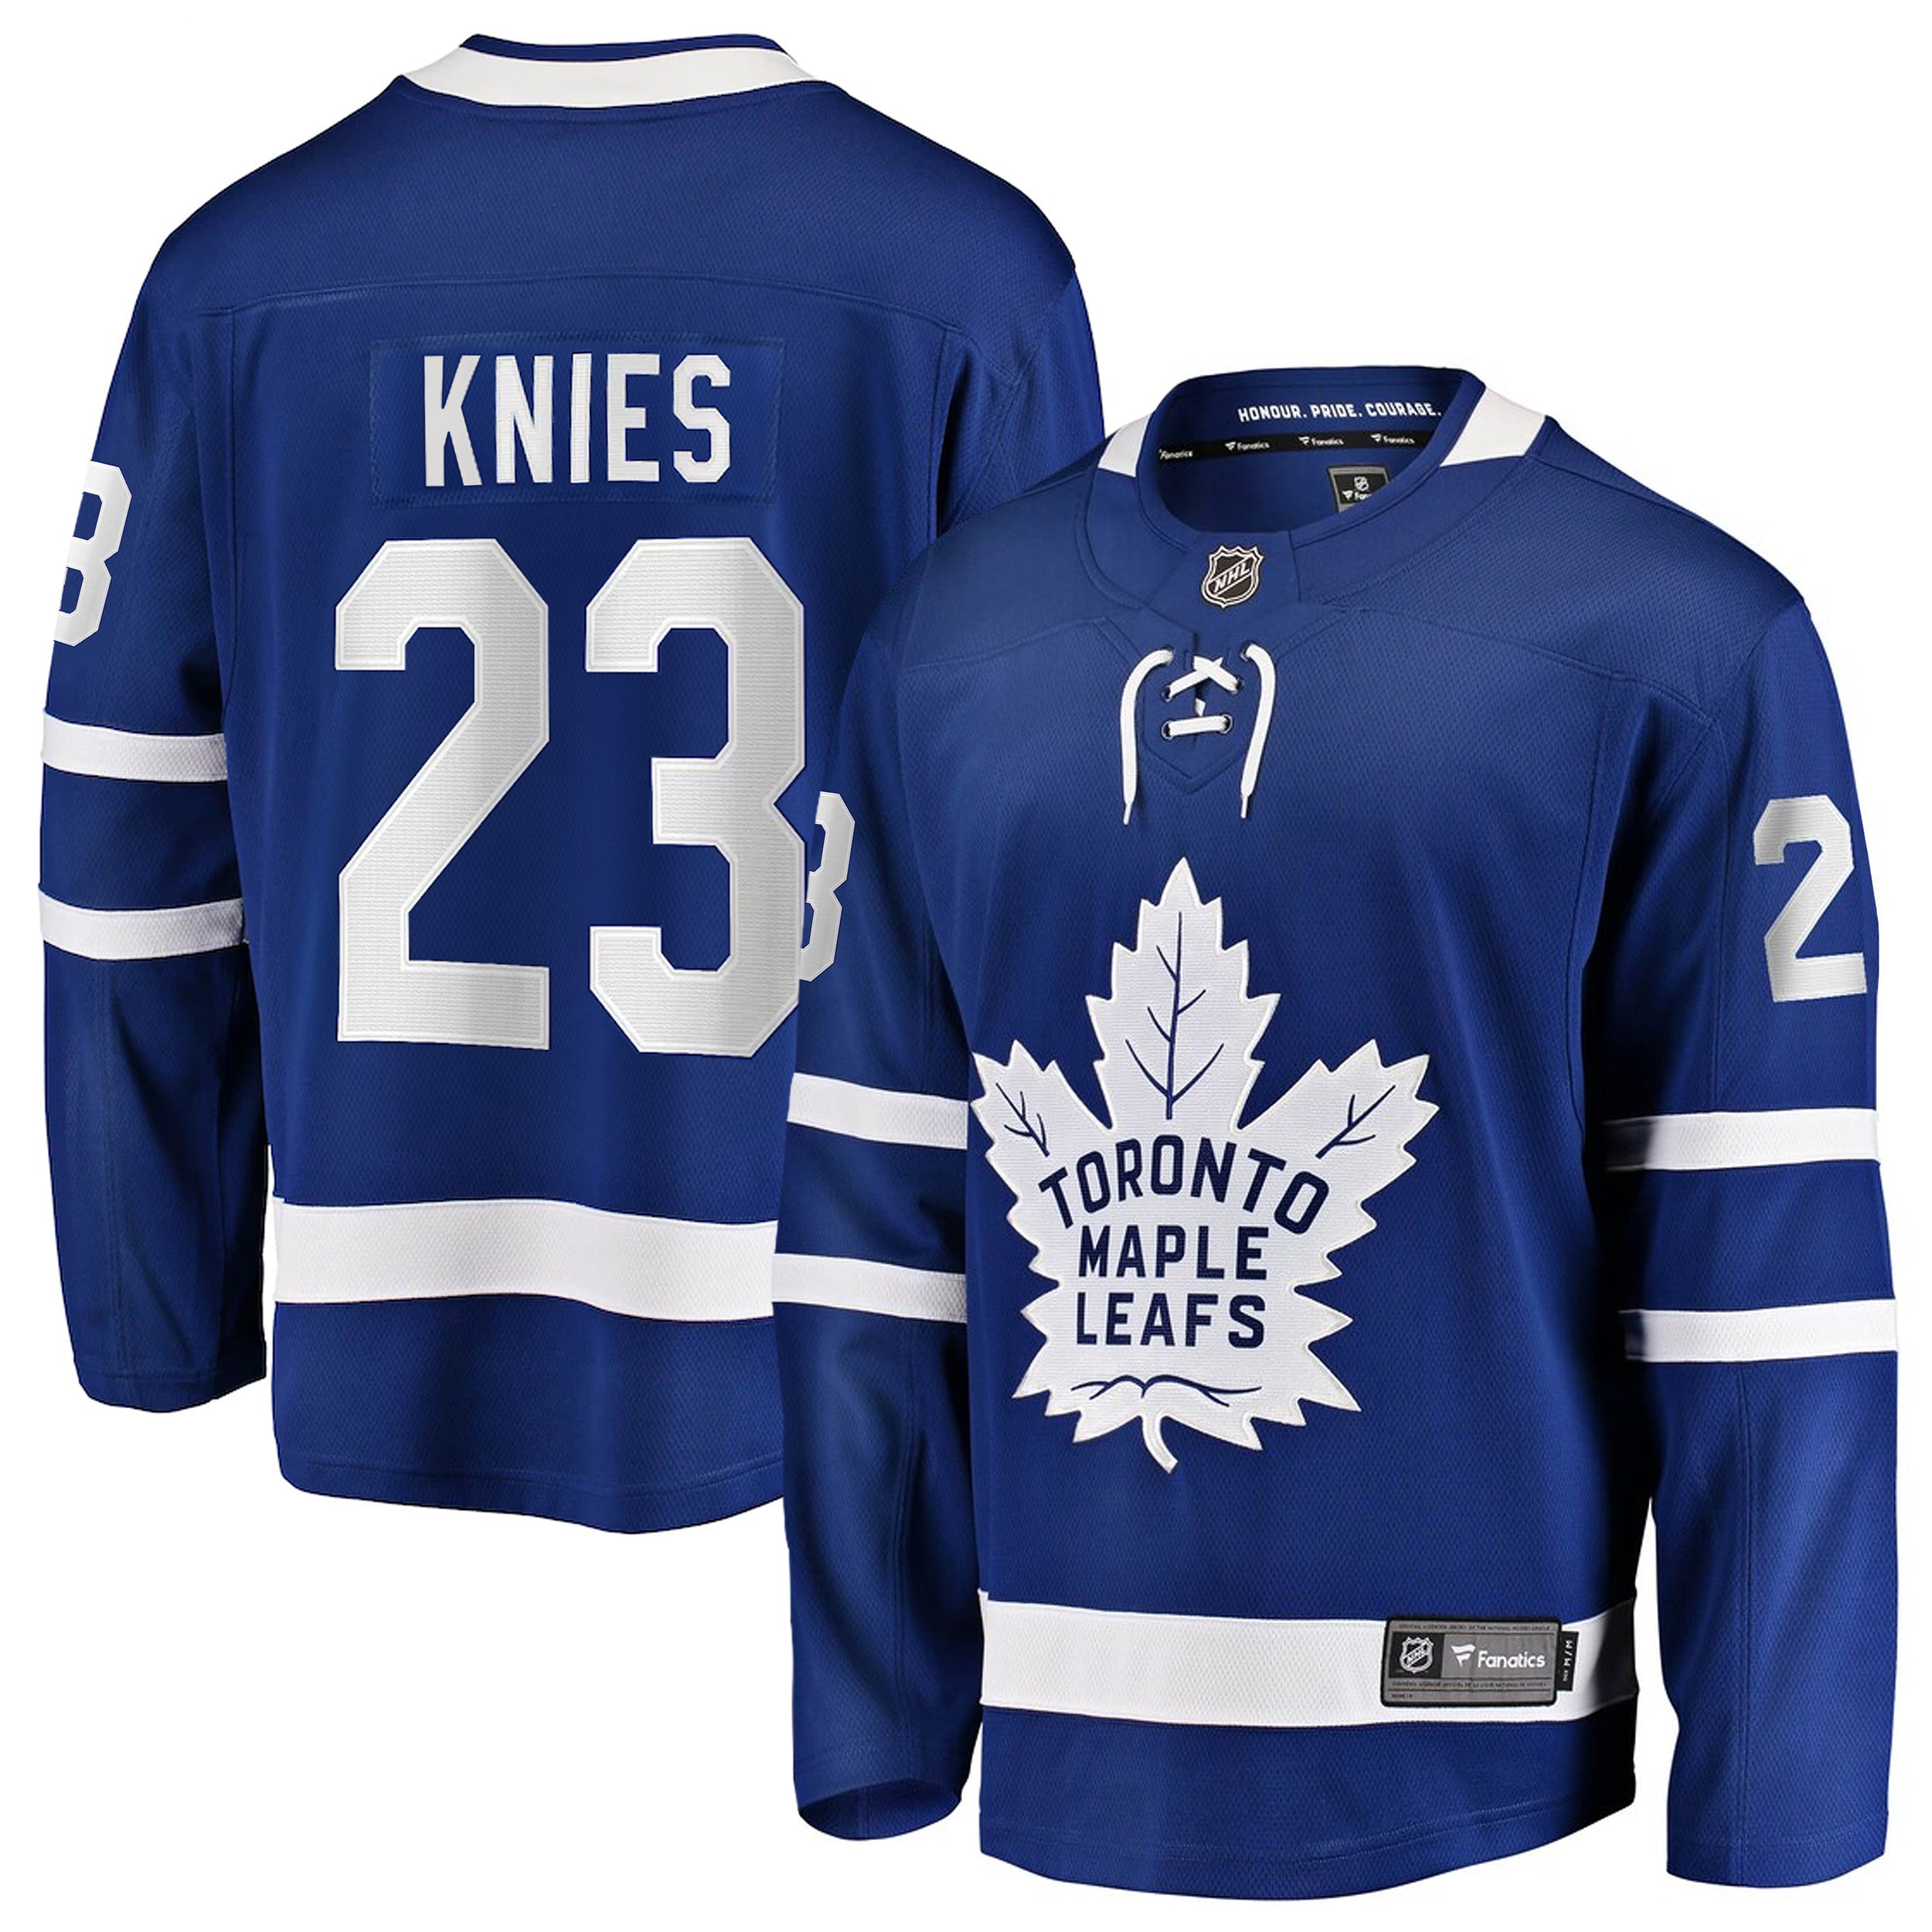 Who is the Maple Leafs' newest Arizona kid? Meet Matthew Knies, a